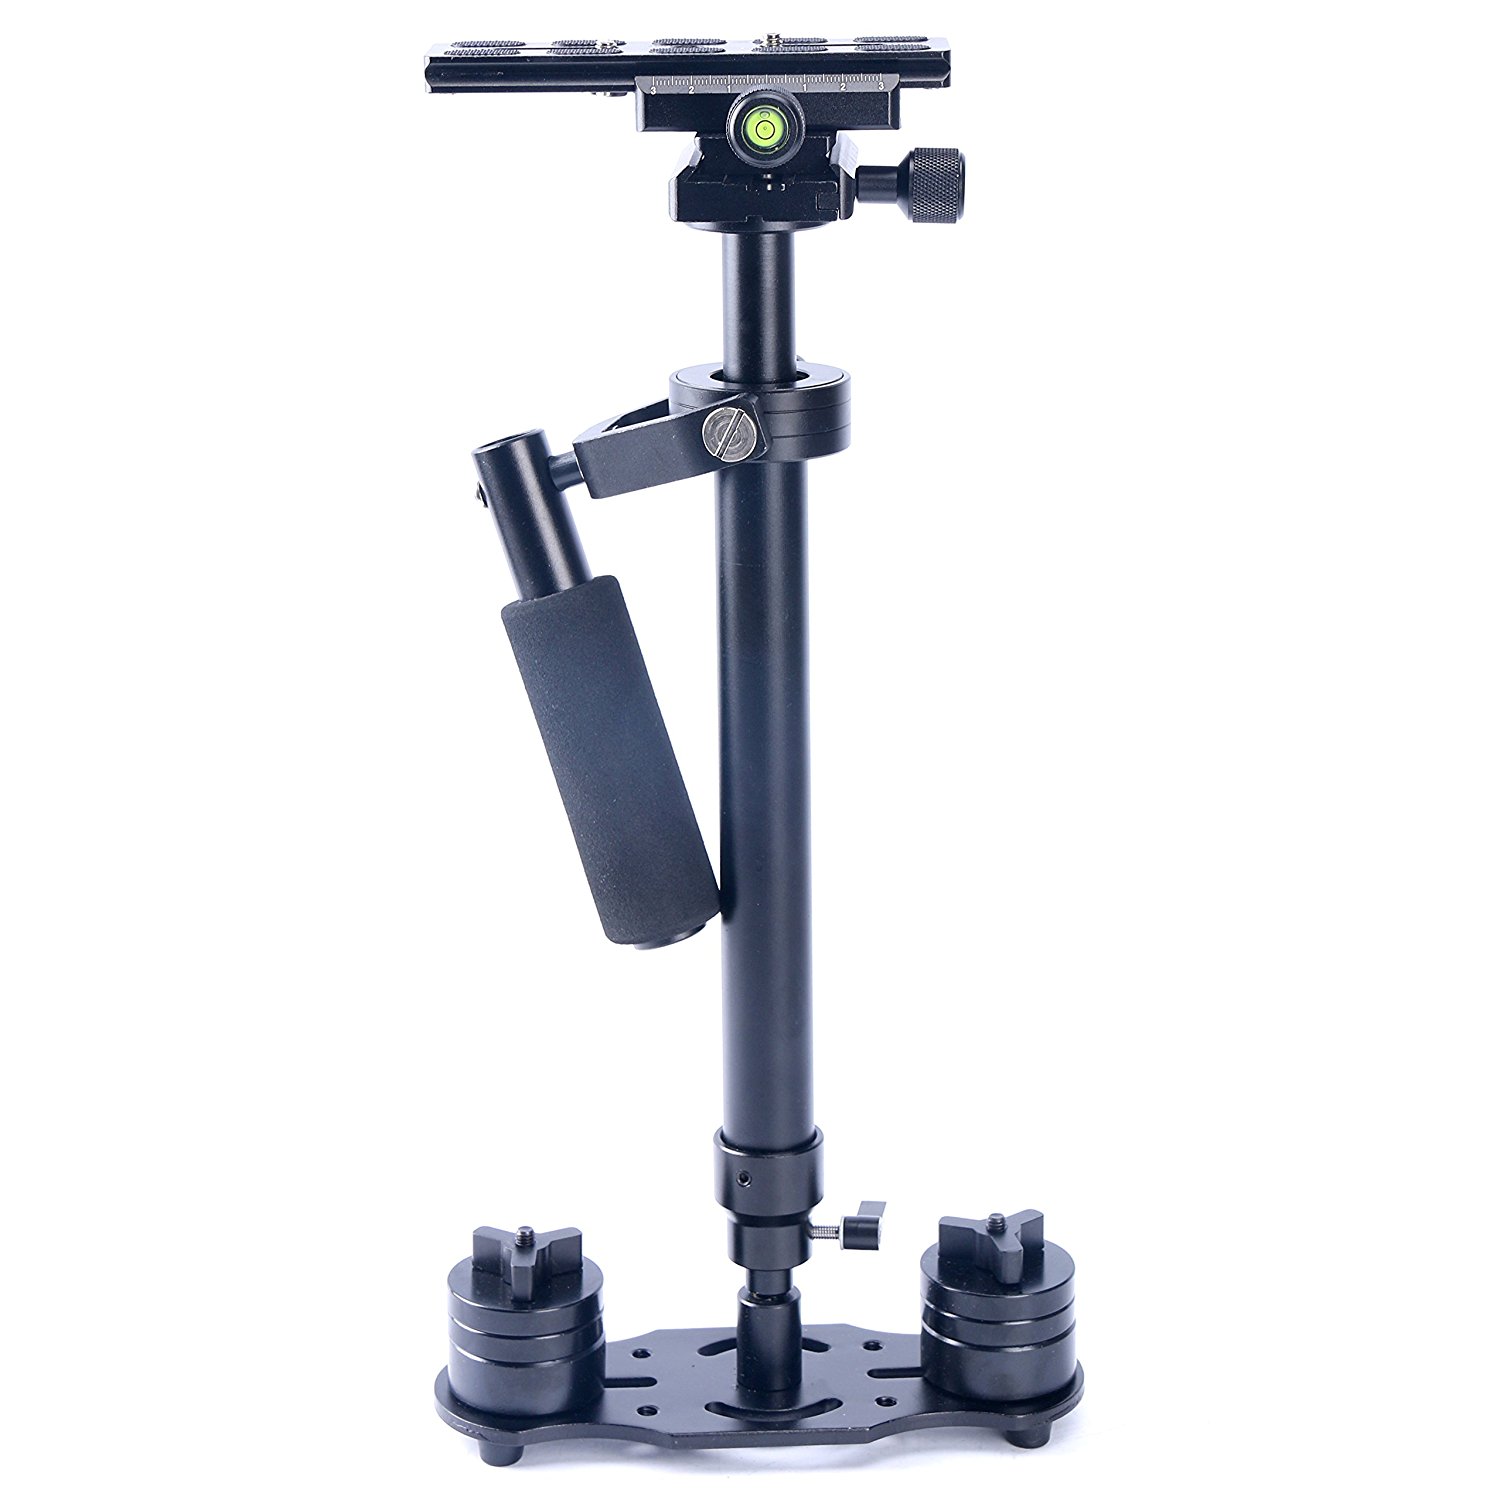 S60 Handheld Steadicam/Camera Stabilizer 24"/60cm with Quick Release Plate DSLR - jhjljpmmhljkqgjrhpkkojmsssnskppsmiCIzn - S60 Handheld Steadicam/Camera Stabilizer 24&#8243;/60cm with Quick Release Plate DSLR